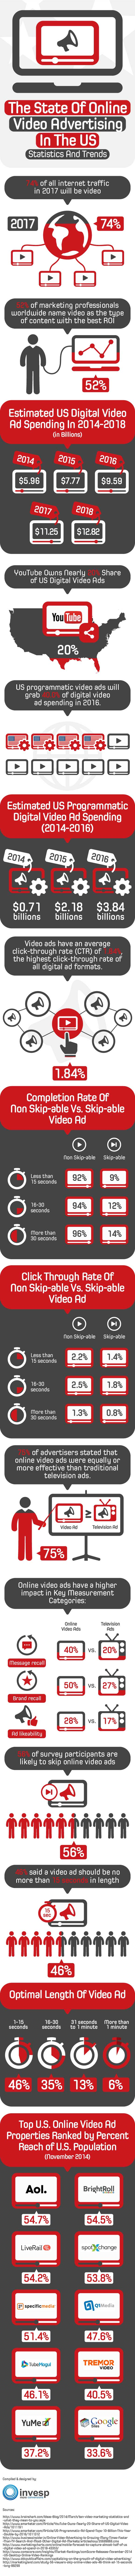 online video advertising Statistics and Trends